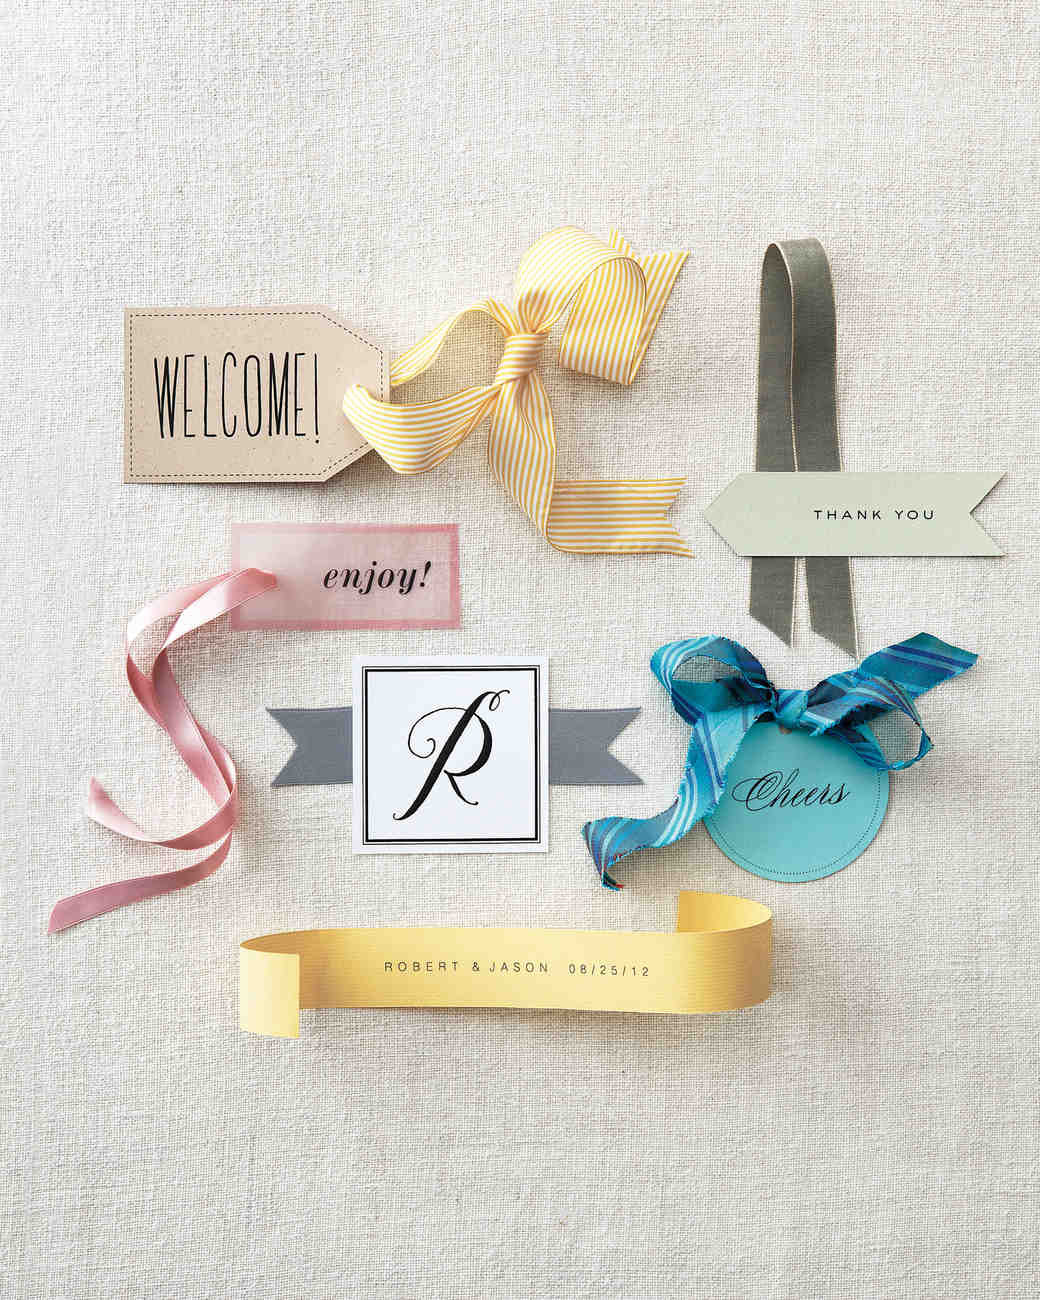 Wedding Tags For Favors
 Favor Tag Clip Art and Templates